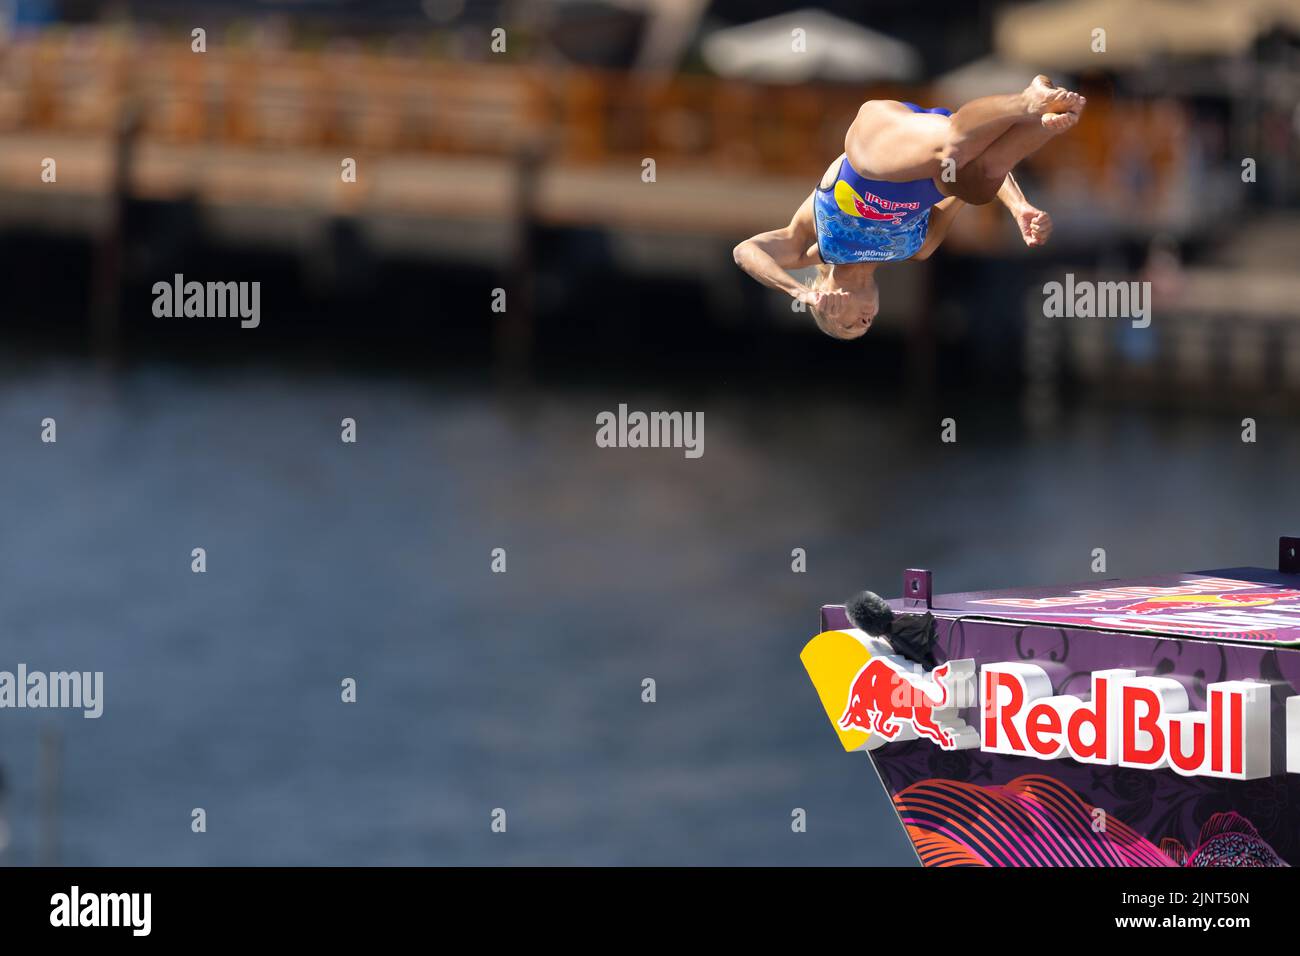 Oslo, Norway 13 August 2022, Rhiannan Iffland of Australia competes in the Red Bull Cliff Diving World Series in Oslo, Norway. credit: Nigel Waldron/Alamy Live News Stock Photo